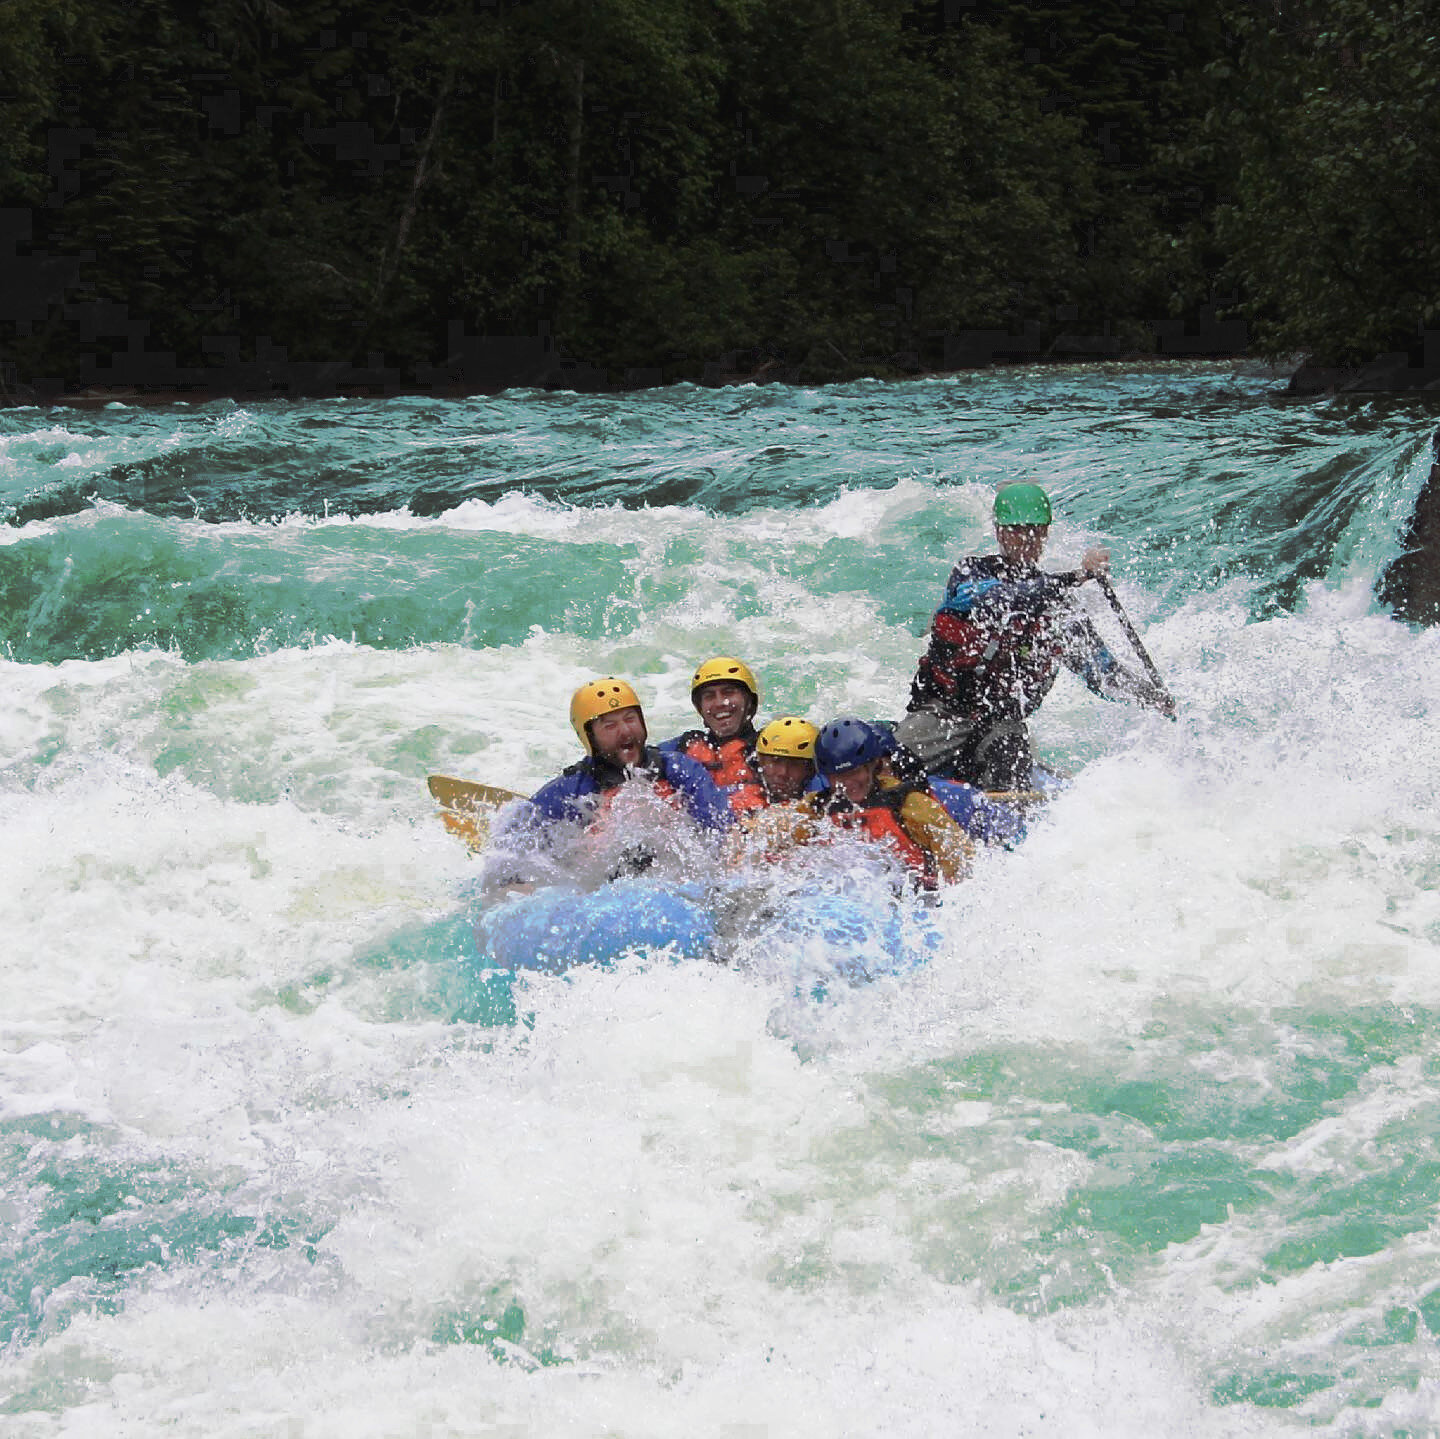 The countdown is on! Two more months until the boats get launched and the rafting begins! We're praying to the snow gods to give us the goods so that the rivers can rage this season. If you're up for the challenge of our Class 4 Beaver or Dore Rivers